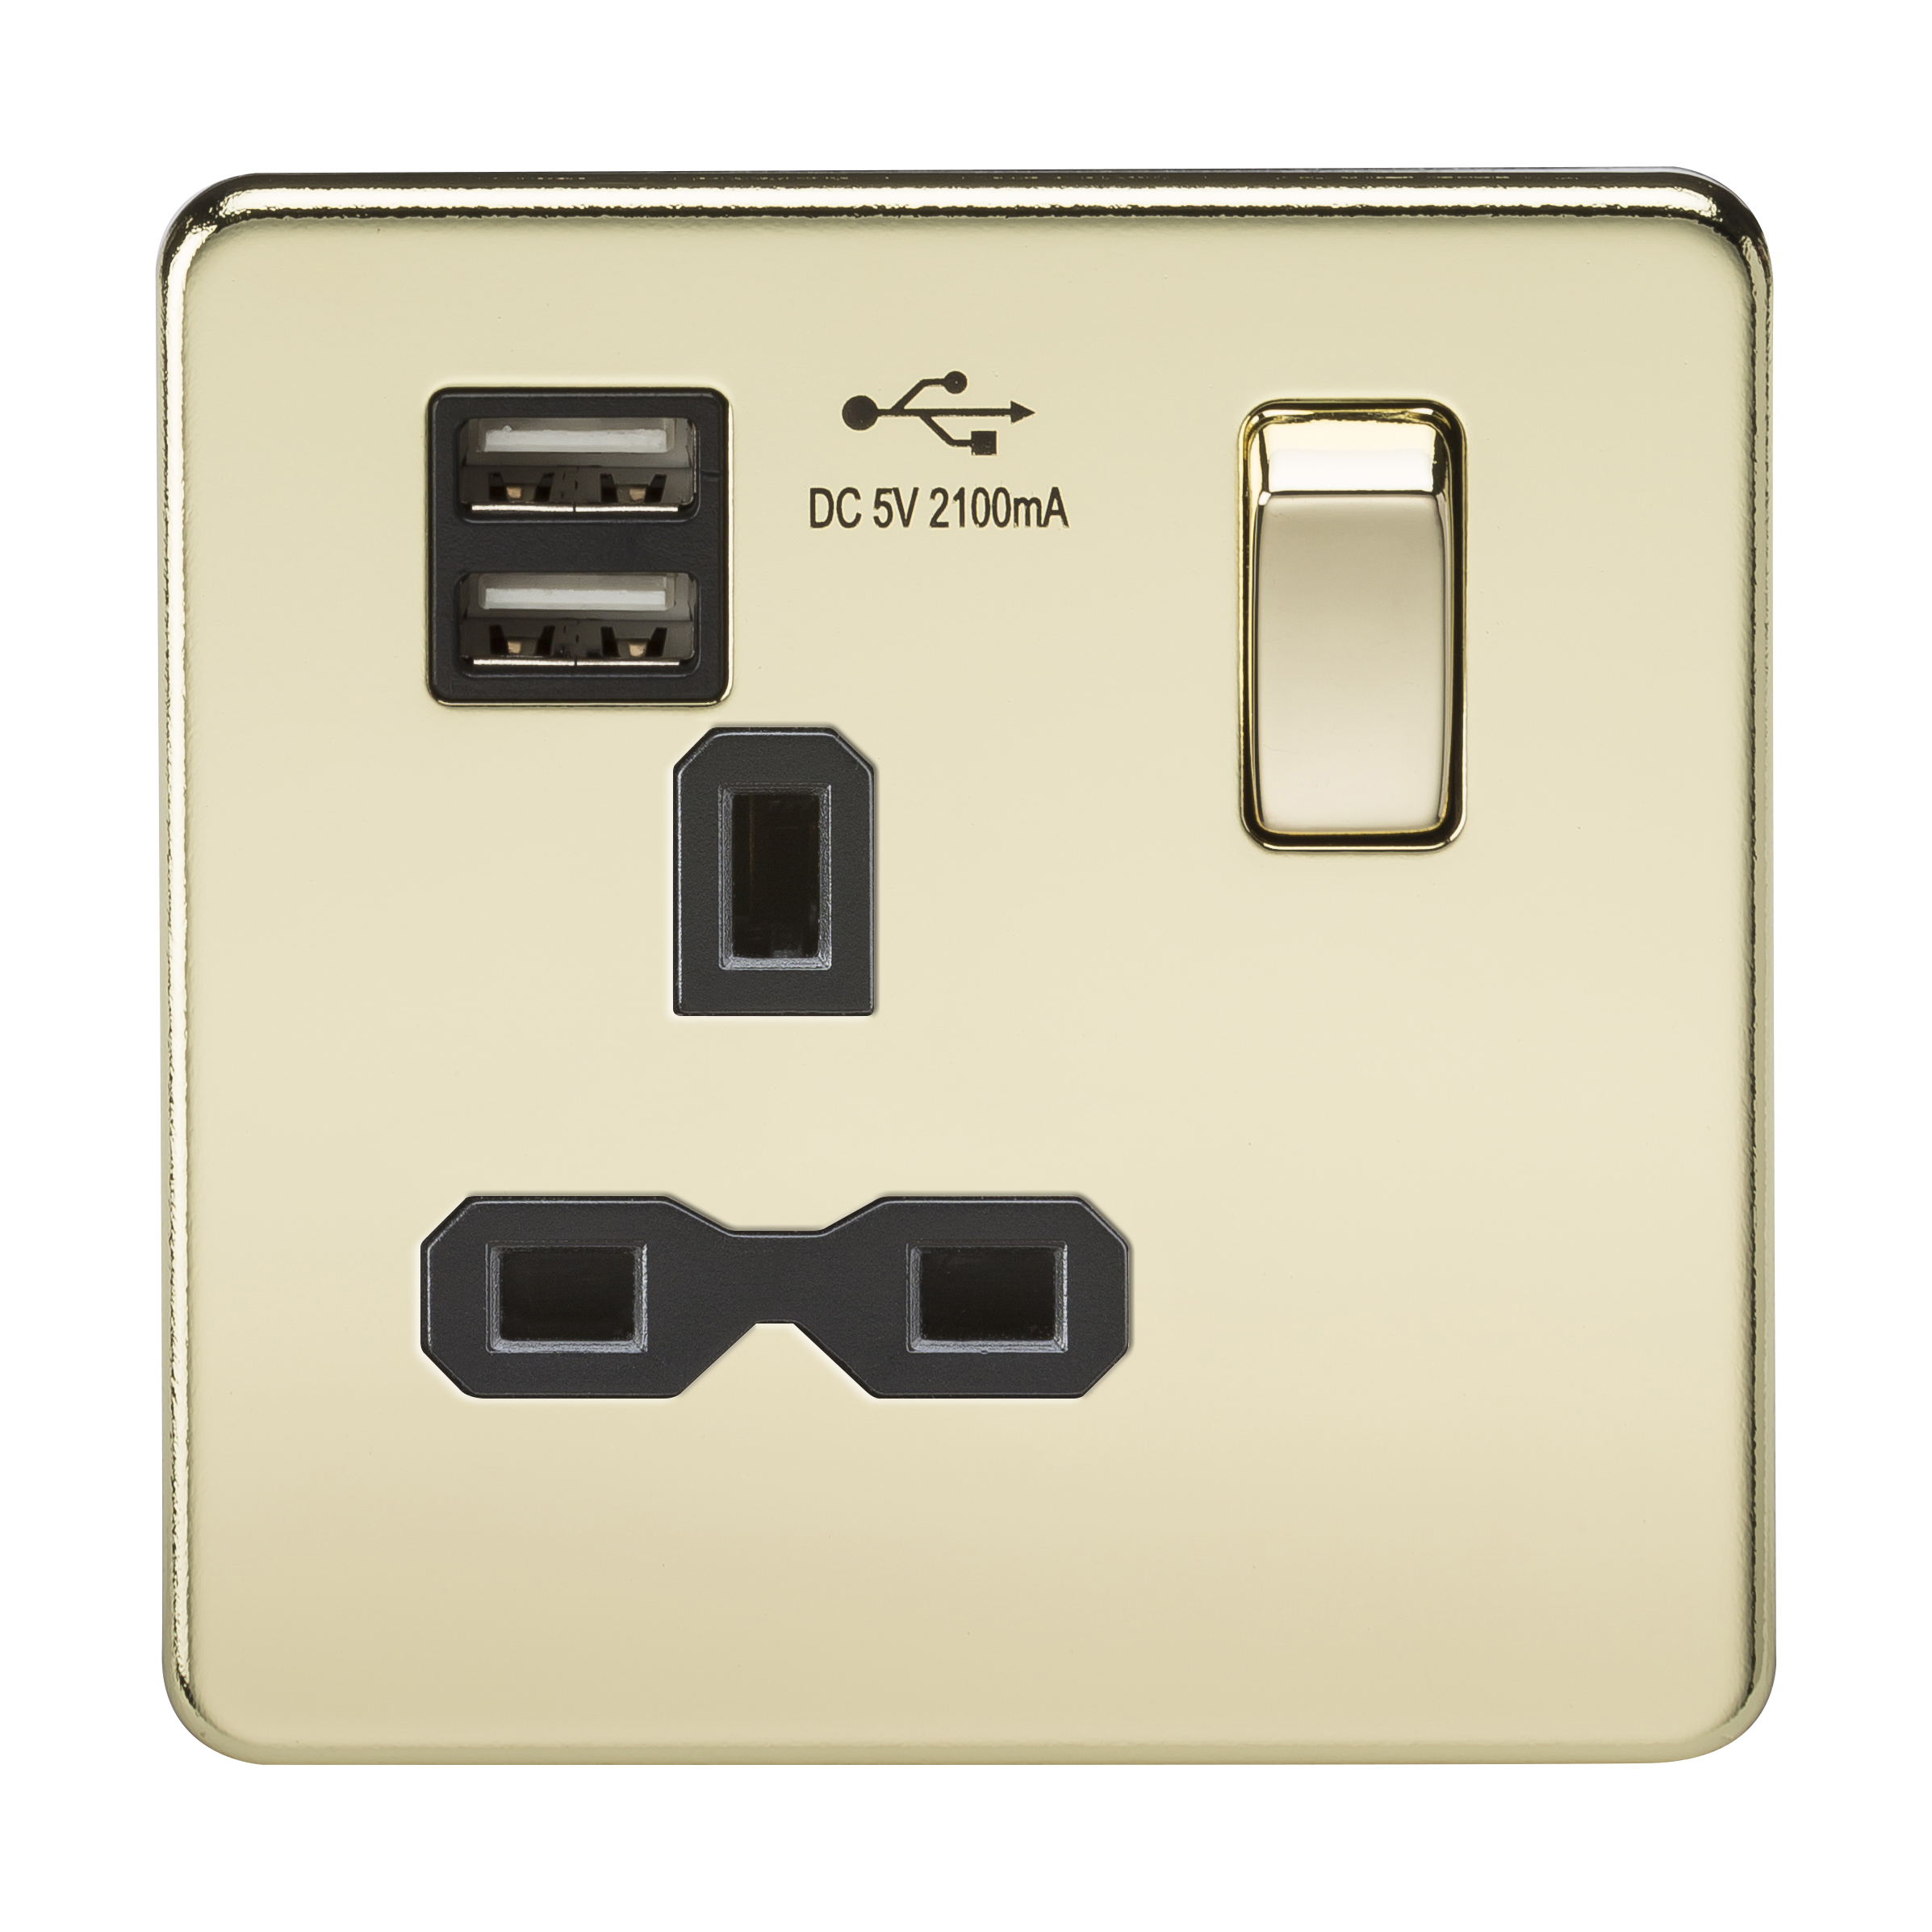 Screwless 13A 1G Switched Socket With Dual USB Charger (2.1A) - Polished Brass With Black Insert - SFR9901PB 